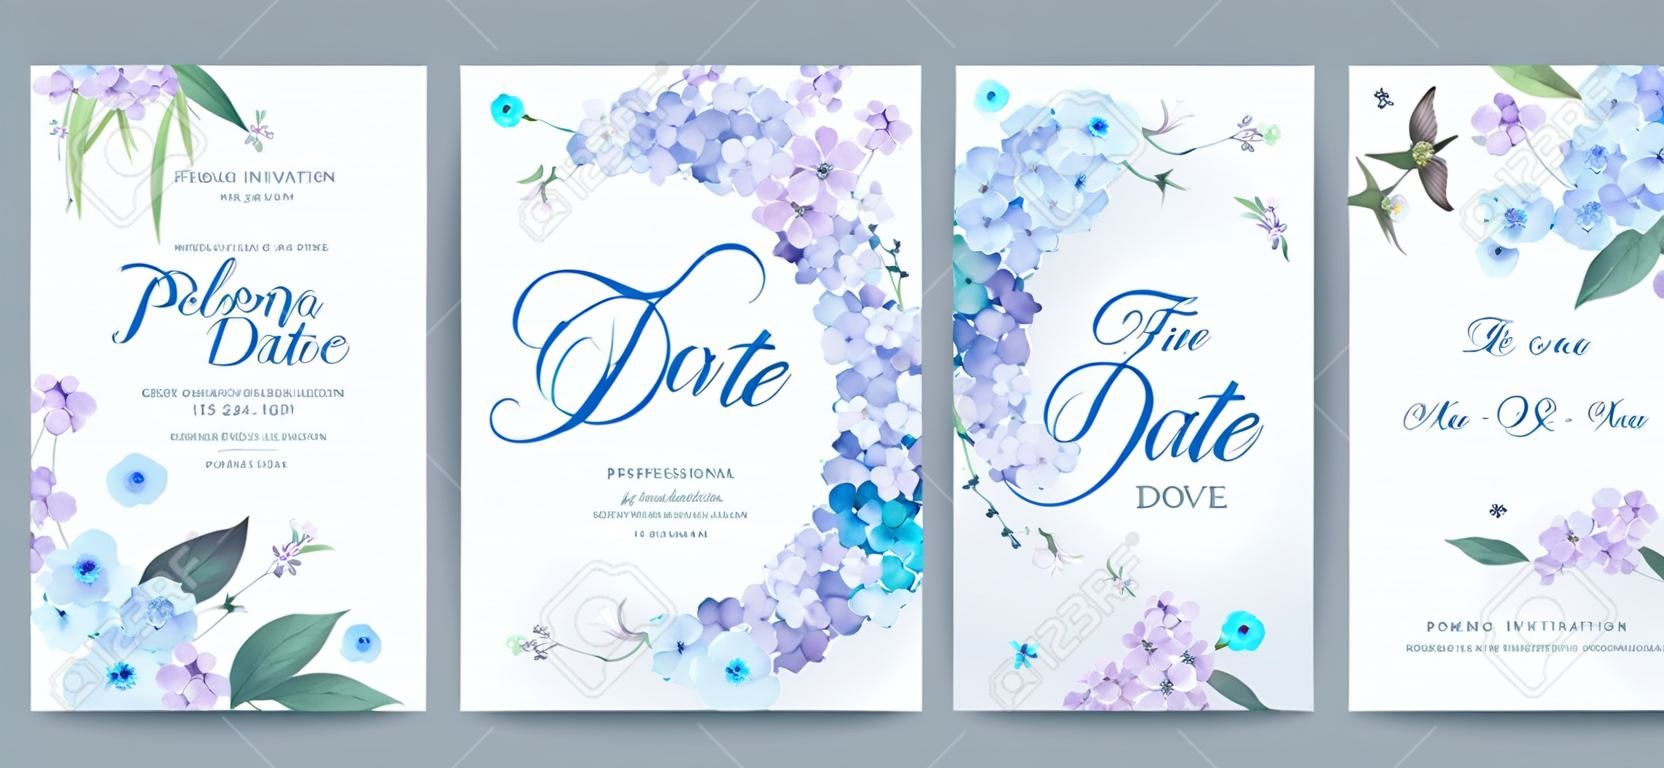 Wedding invitation card template. Floral design with blooming flowers of light-blue and violet Phloxes, green leaves. Vector illustration in delicate pastel palette